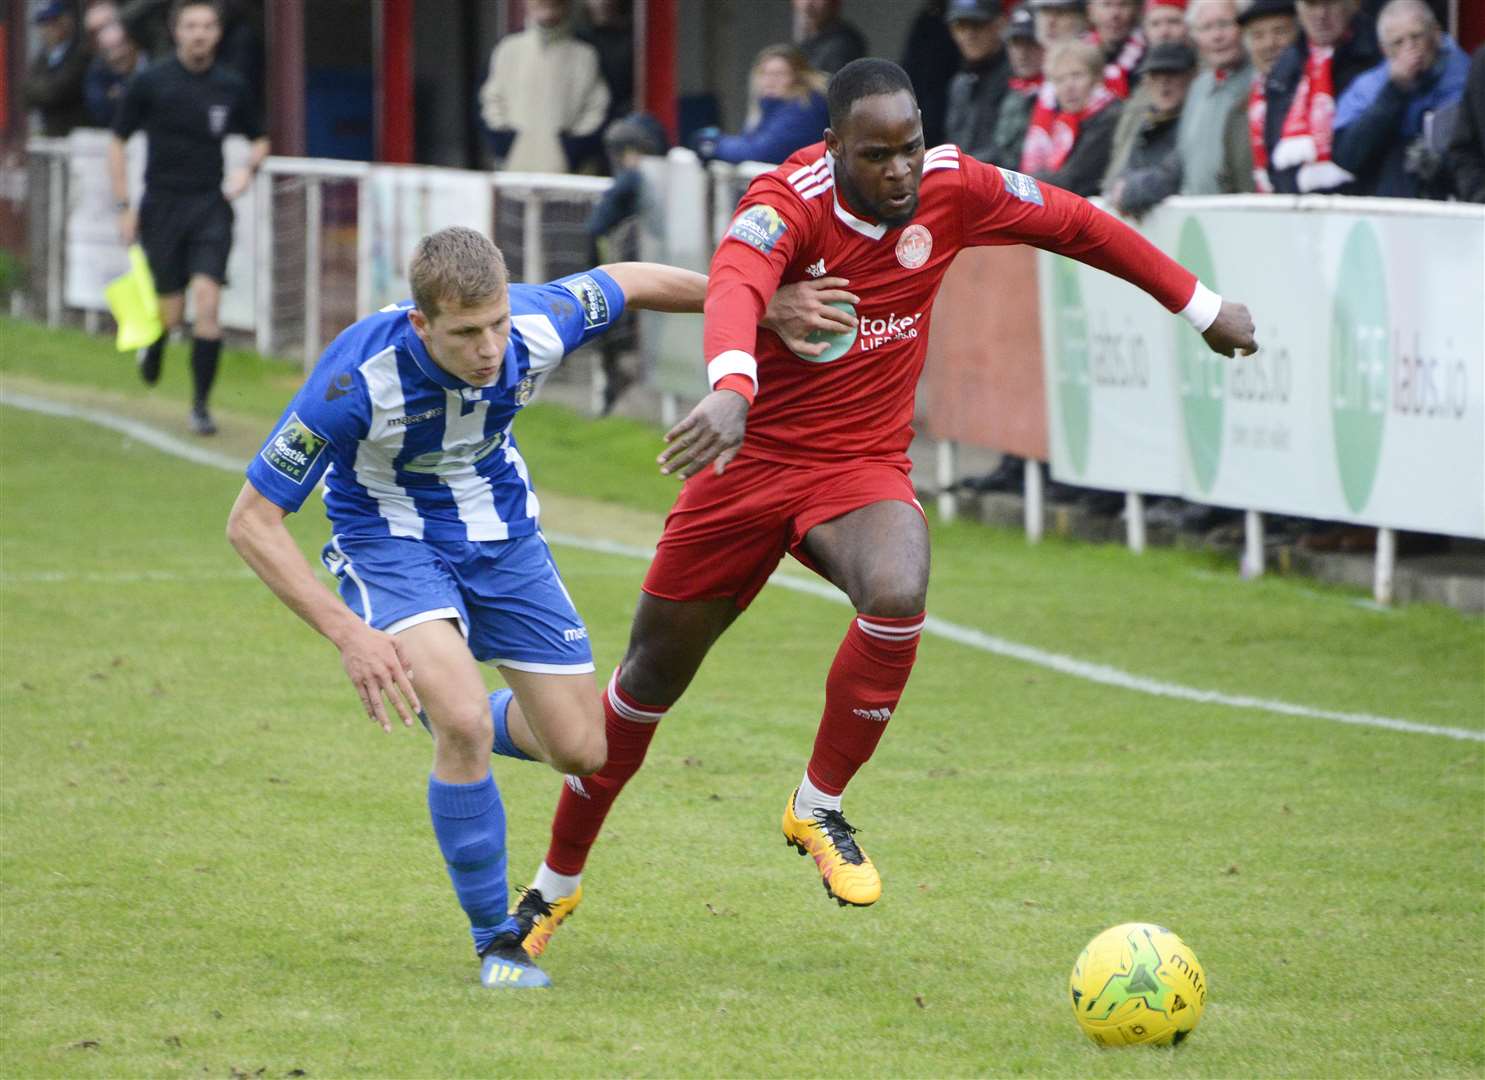 Nigel Neita did not play for Hythe again after the FA hearing Picture: Paul Amos